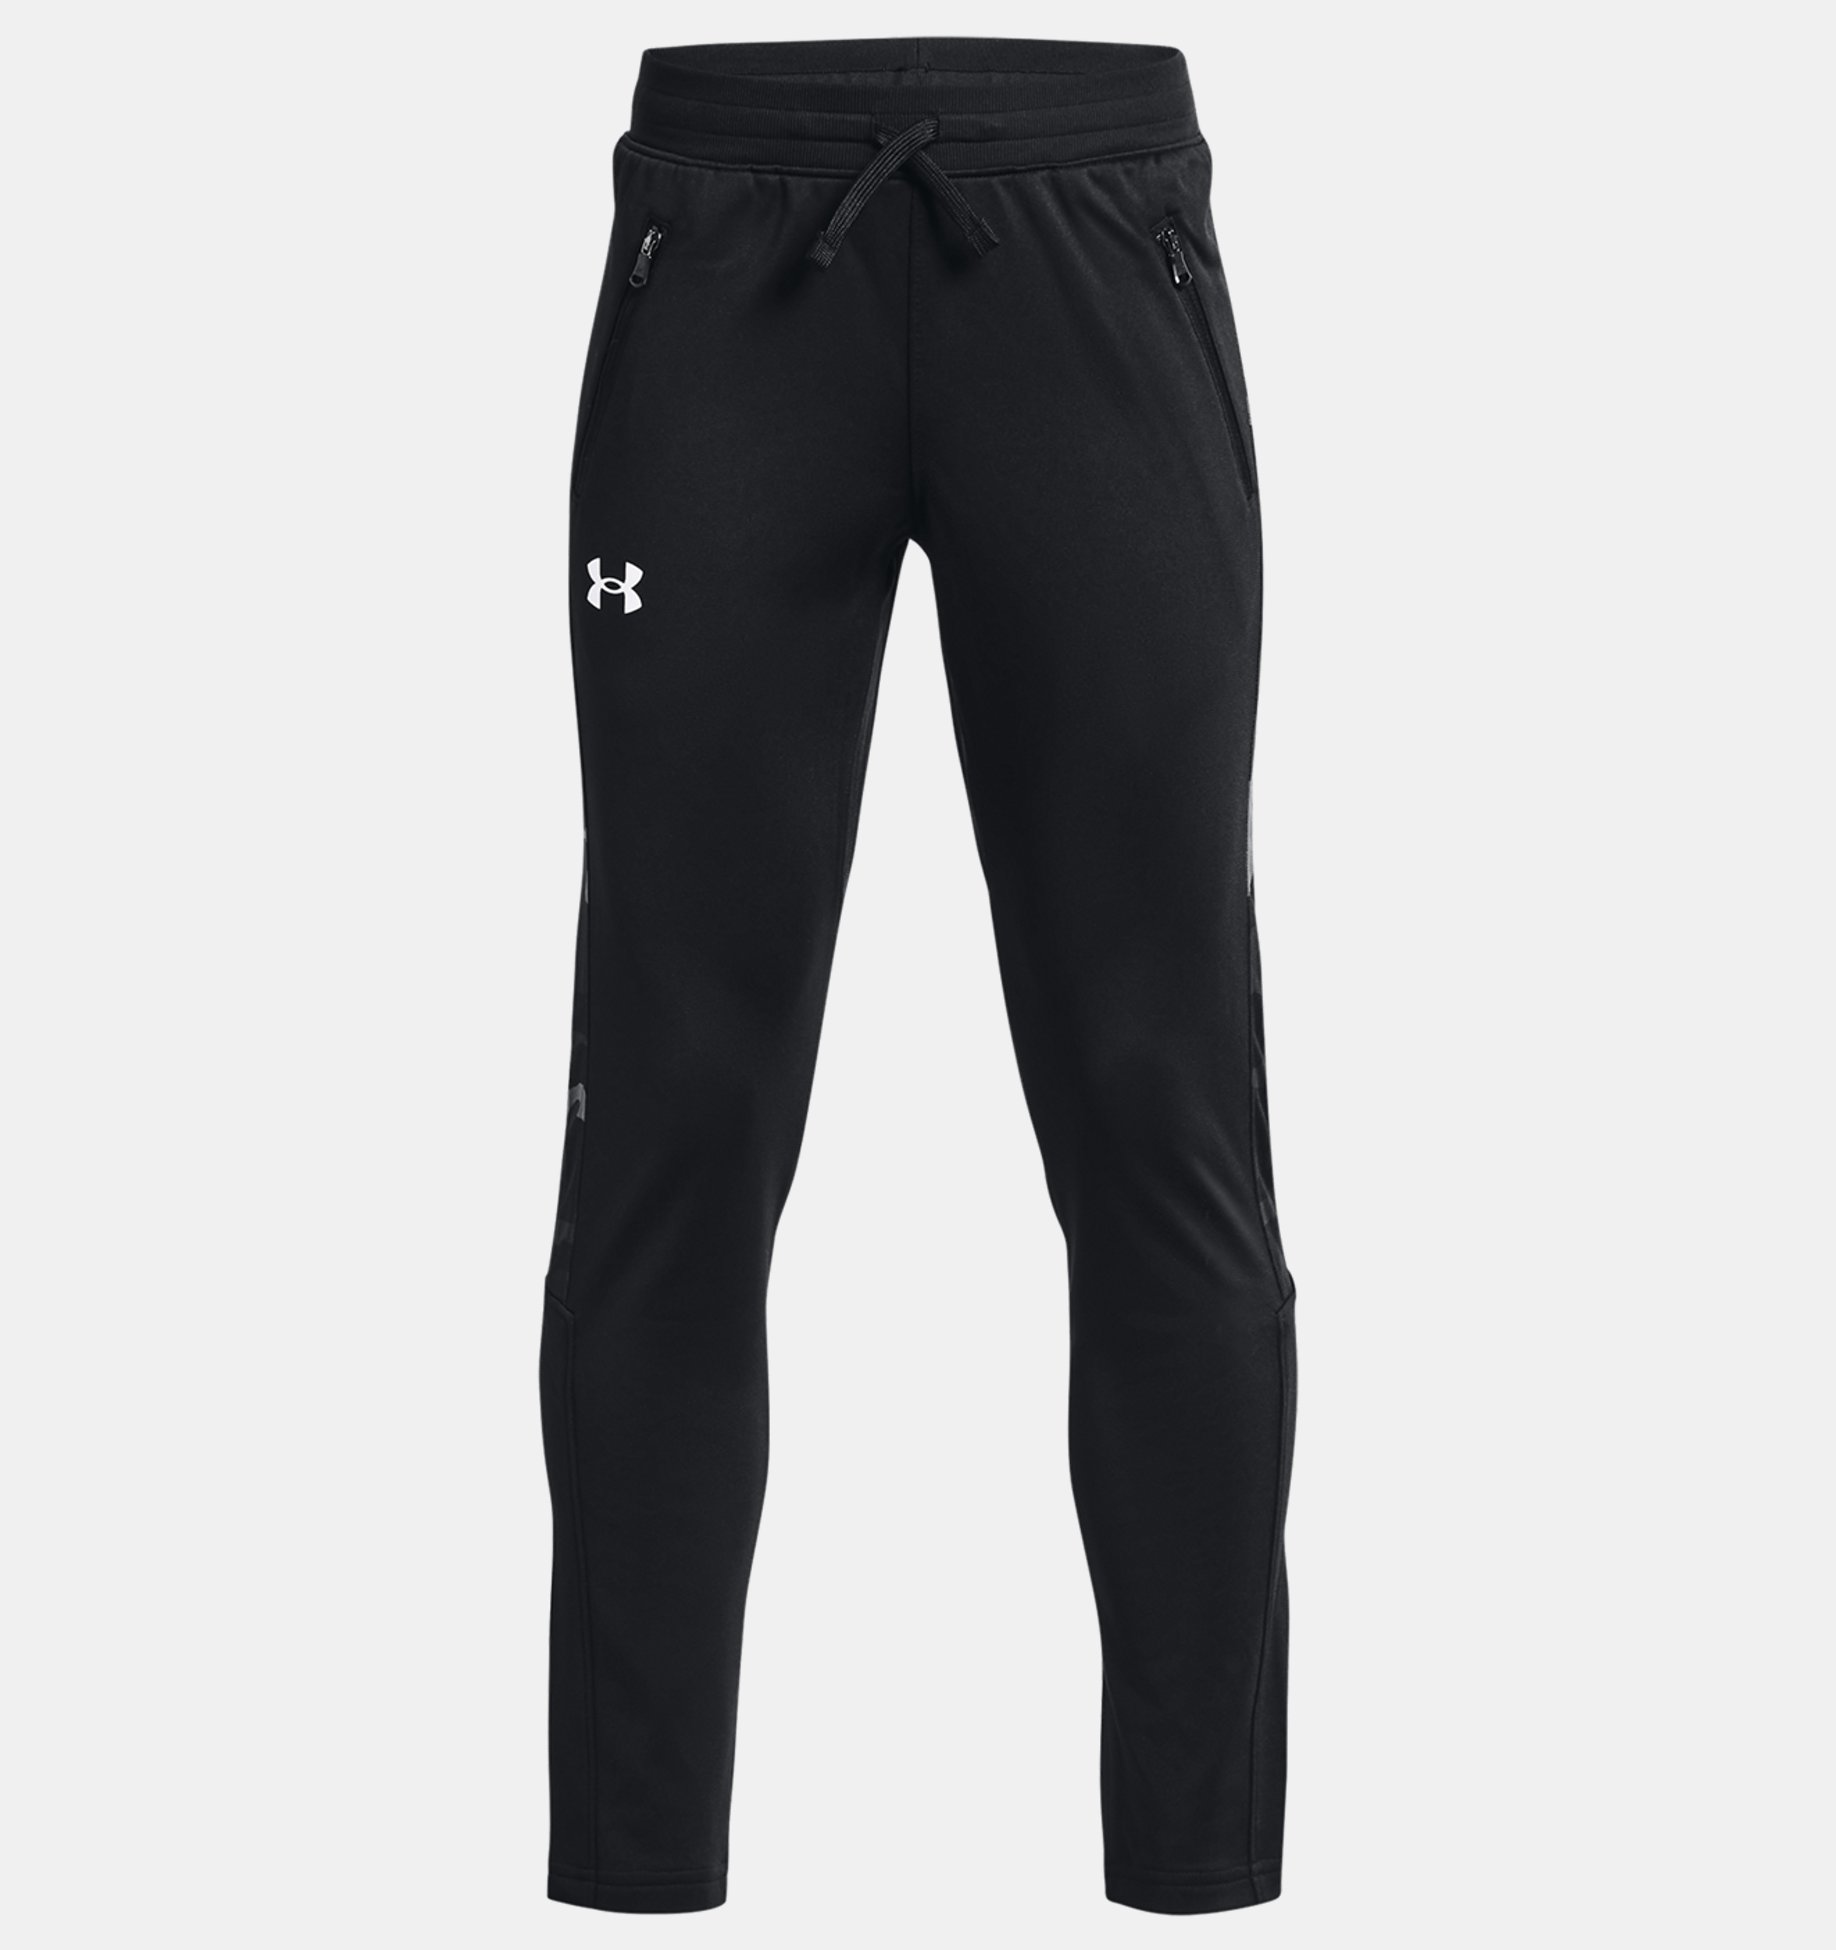 Under Armour Pennant Tapered Pants BLACK YSM 